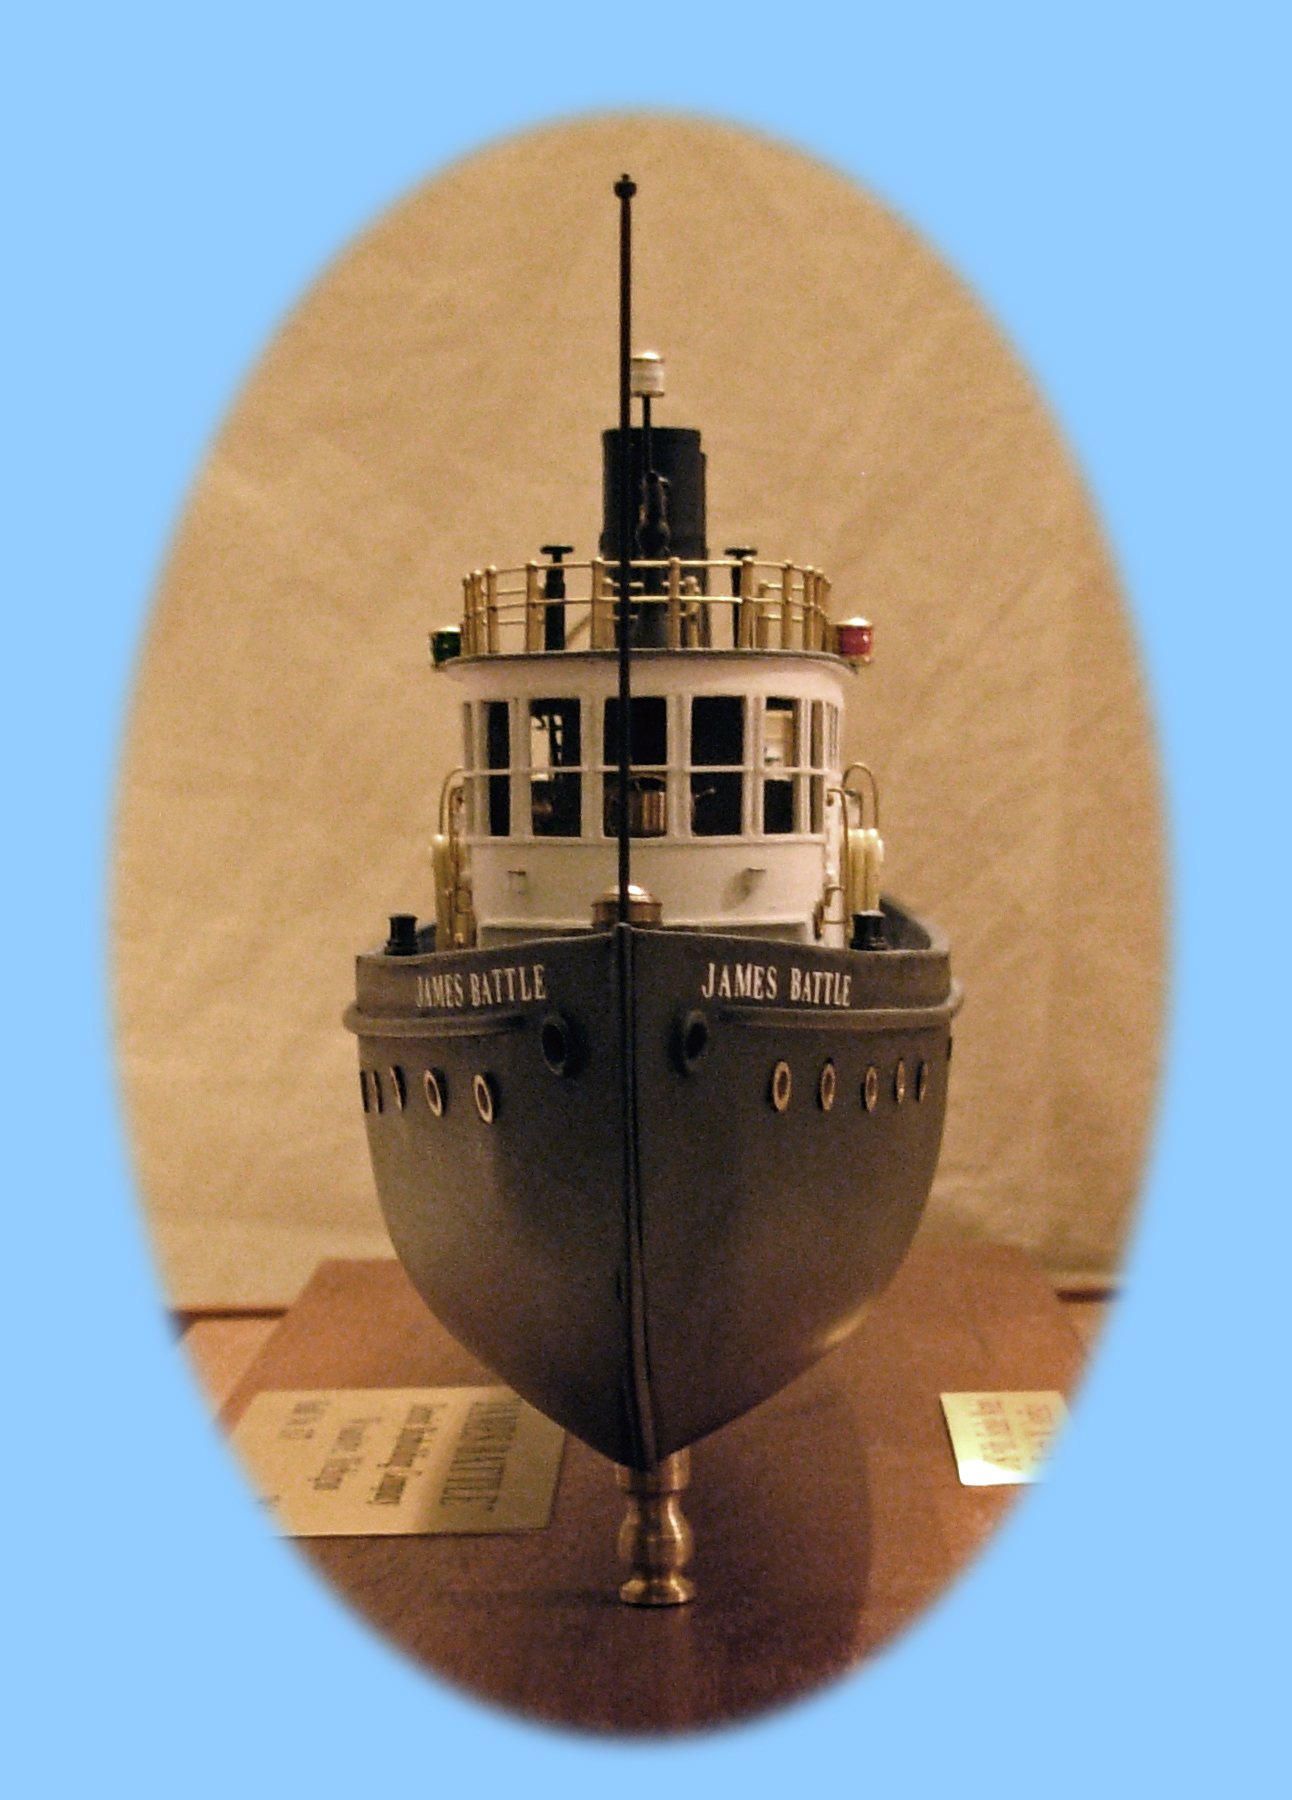 Bow of the model